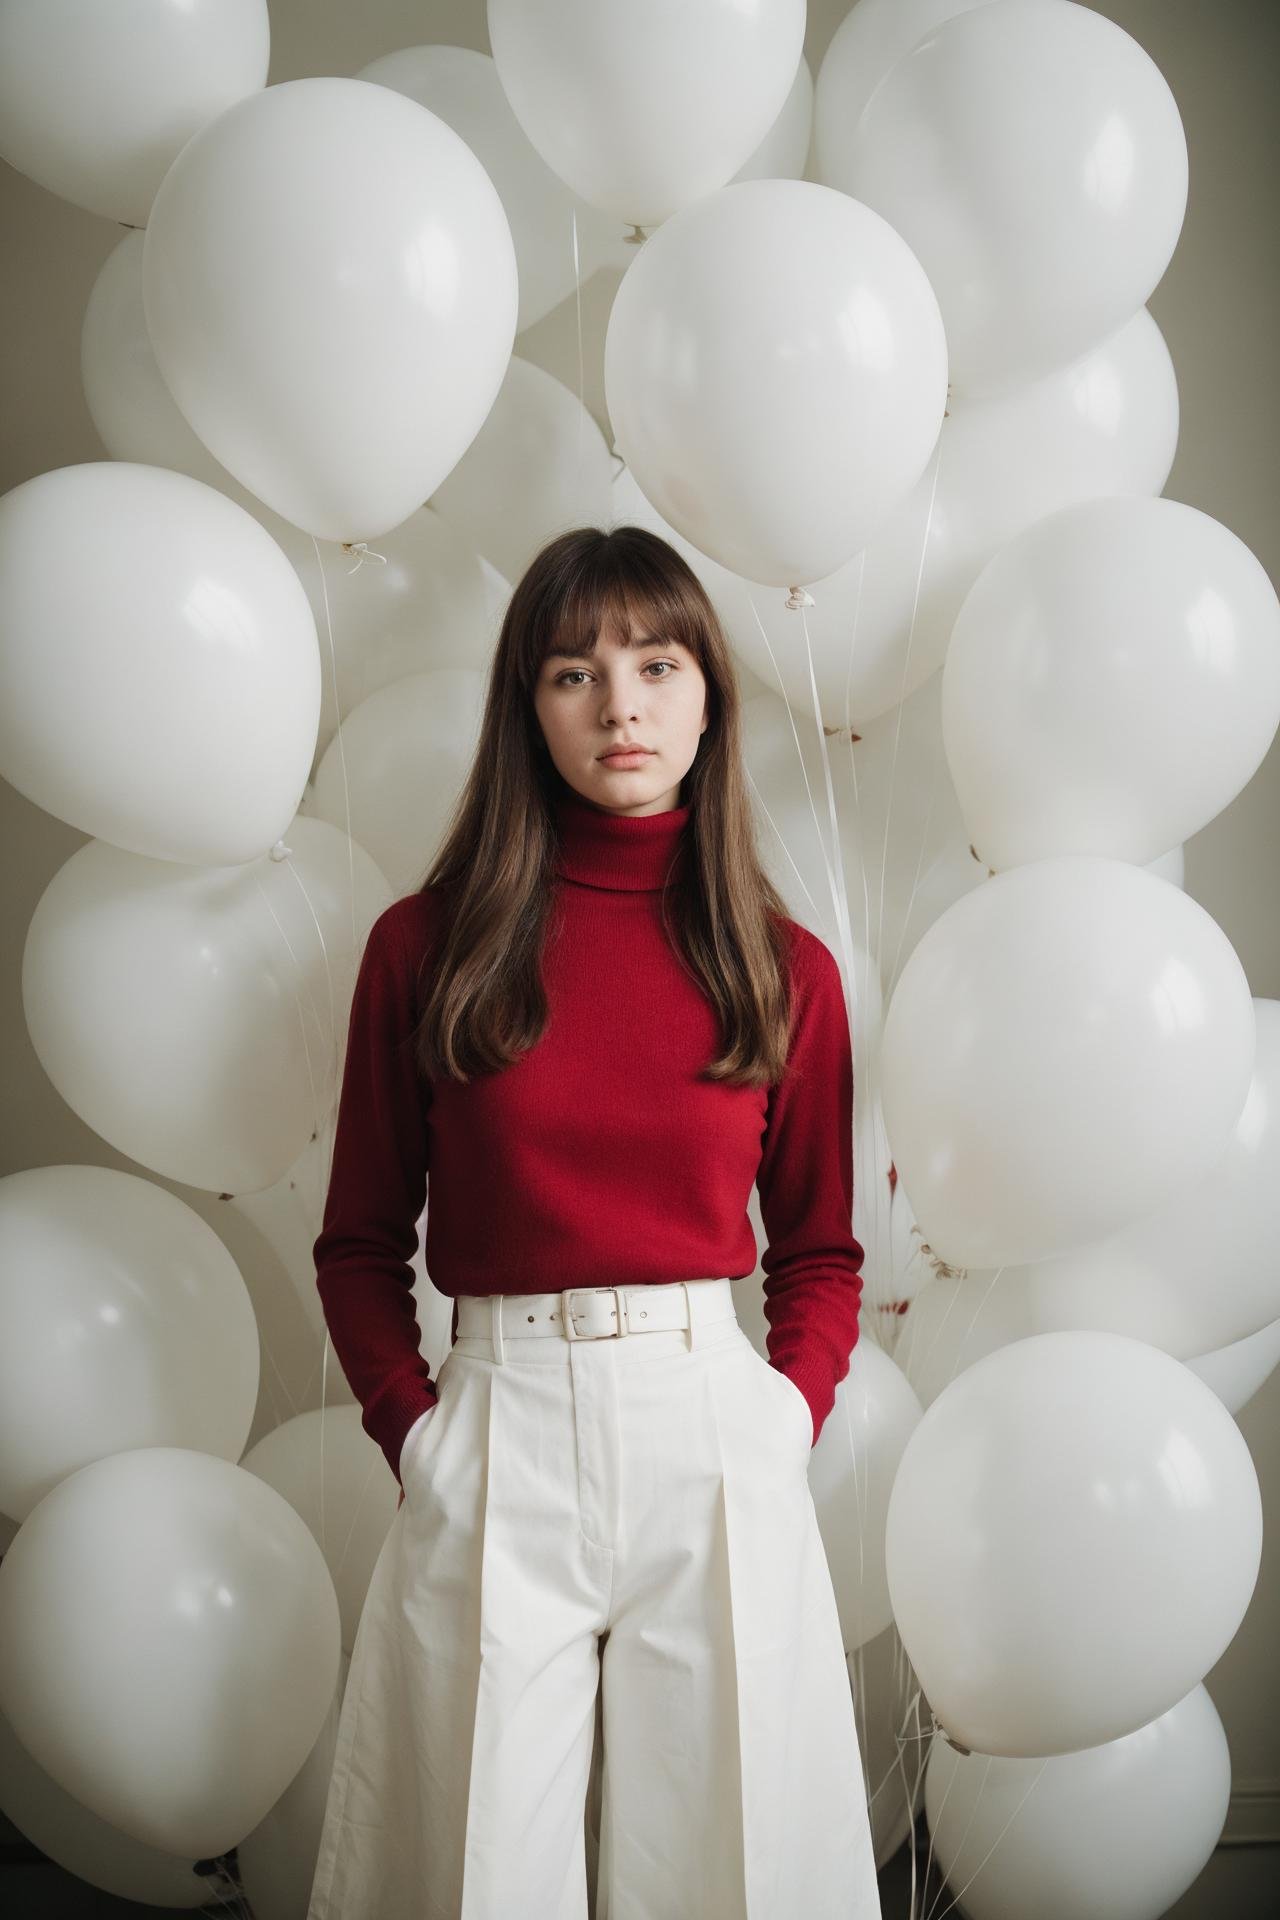 fashion portrait photo of beautiful young woman from the 60s wearing a red turtleneck standing in the middle of a ton of white balloons, taken on a hasselblad medium format camera